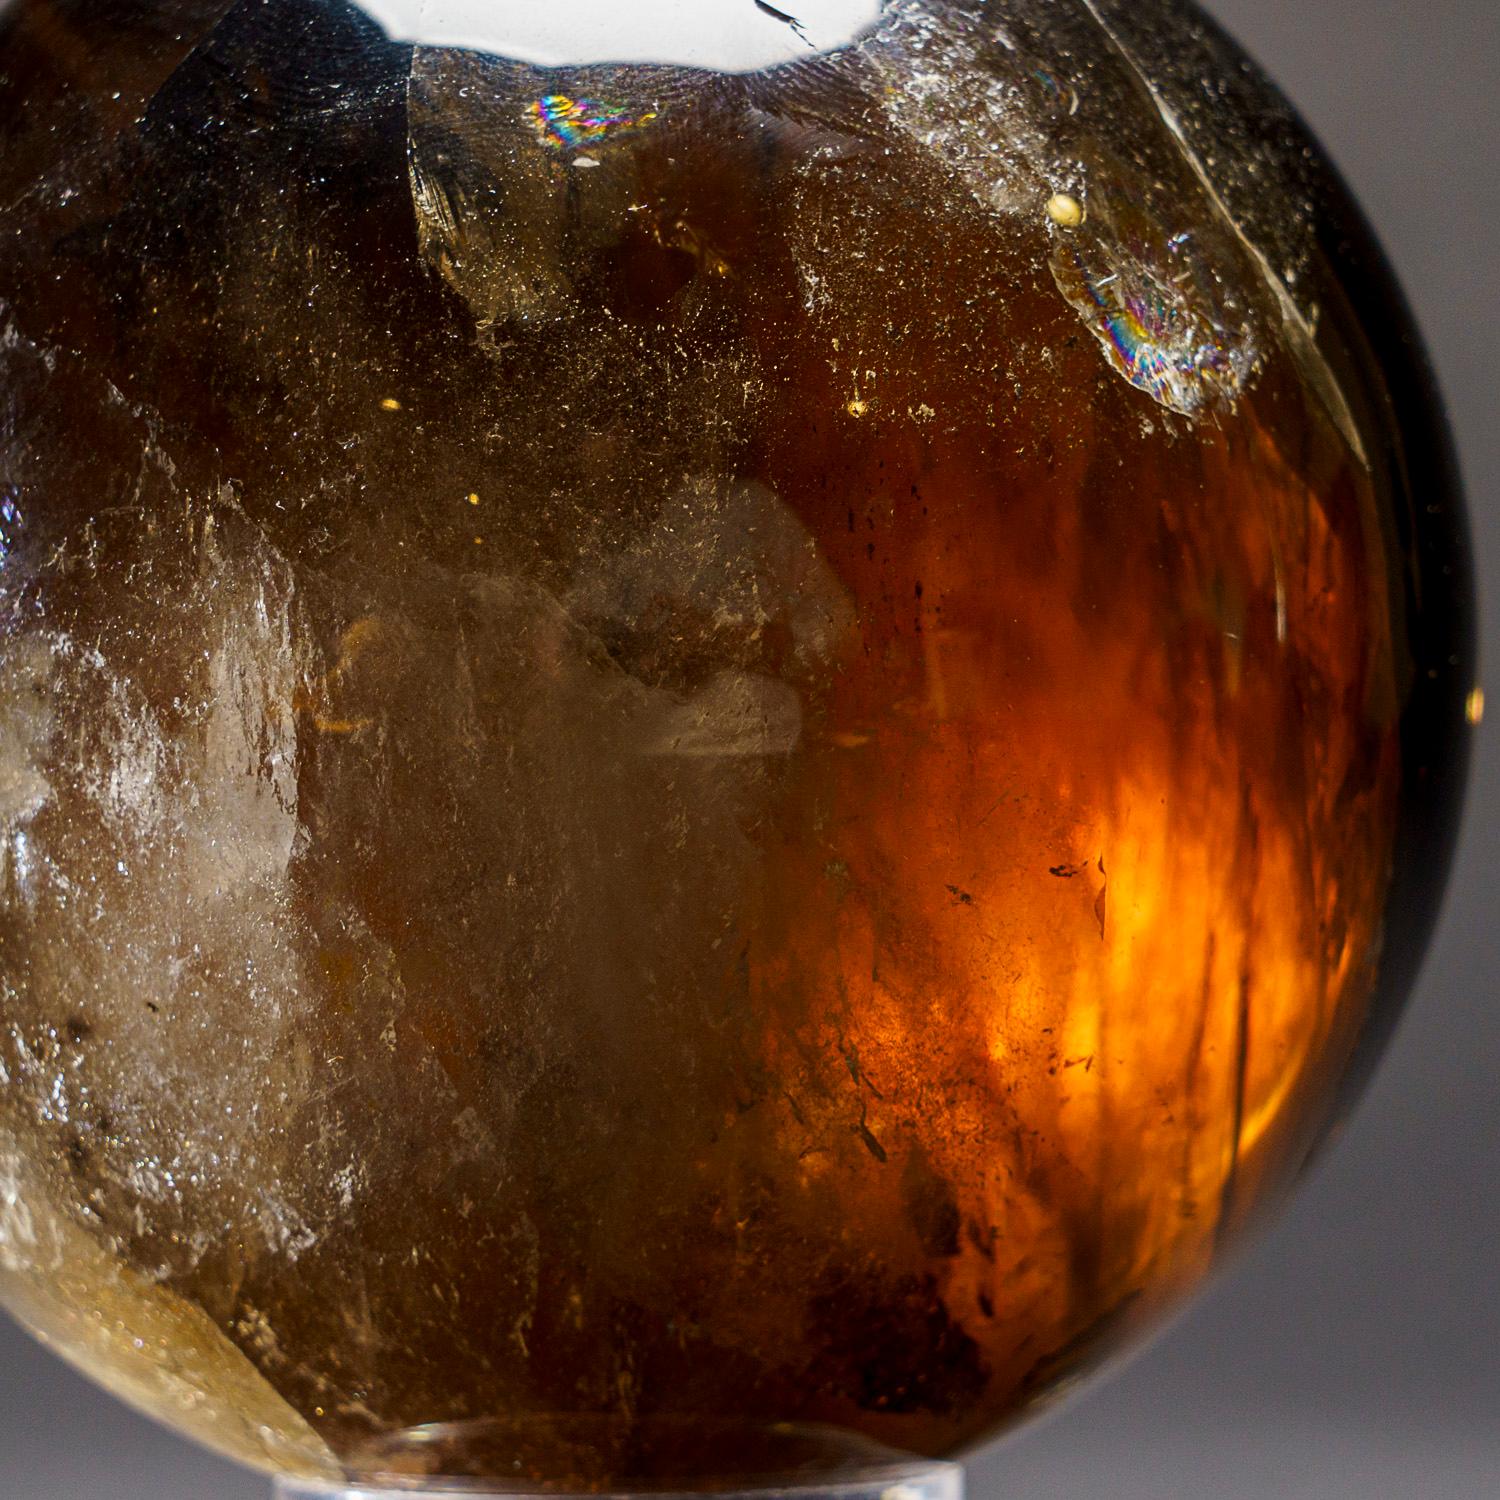 This expertly polished Smoky Quartz sphere from Brazil is a museum quality and boasts high levels of transparency and reflectivity, making it a valuable addition to any crystal, mineral, or collectible collection. It has a subtle yet powerful energy